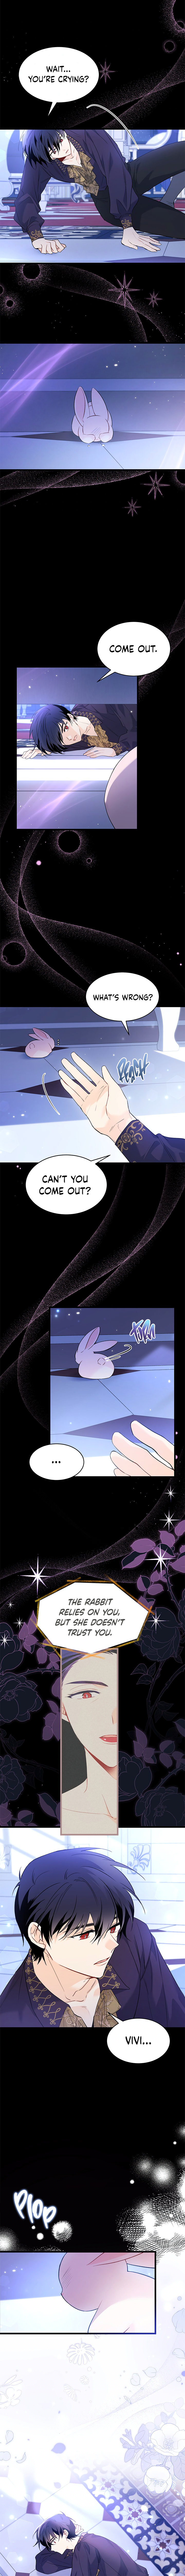 The Symbiotic Relationship Between A Rabbit and A Black Panther - Chapter 58 Page 7